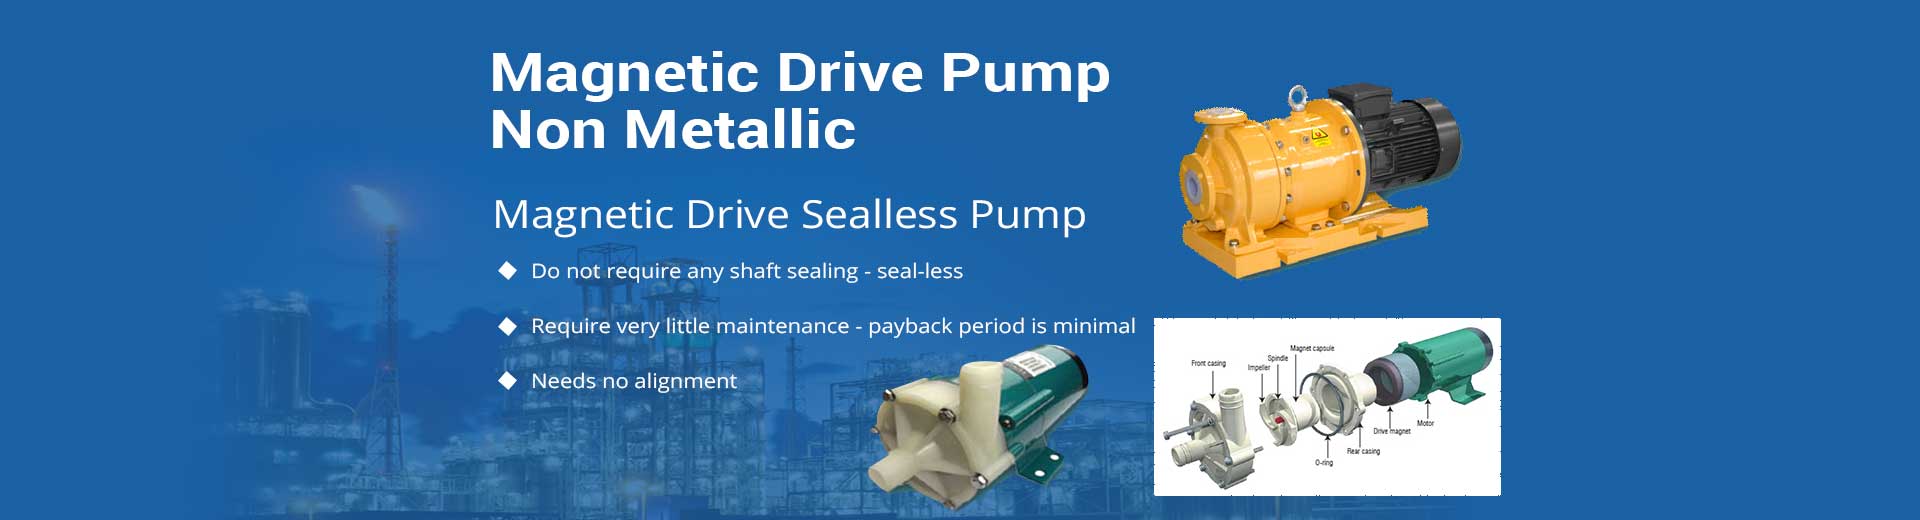 Antico Pumps Manufacturing and Supplying in india